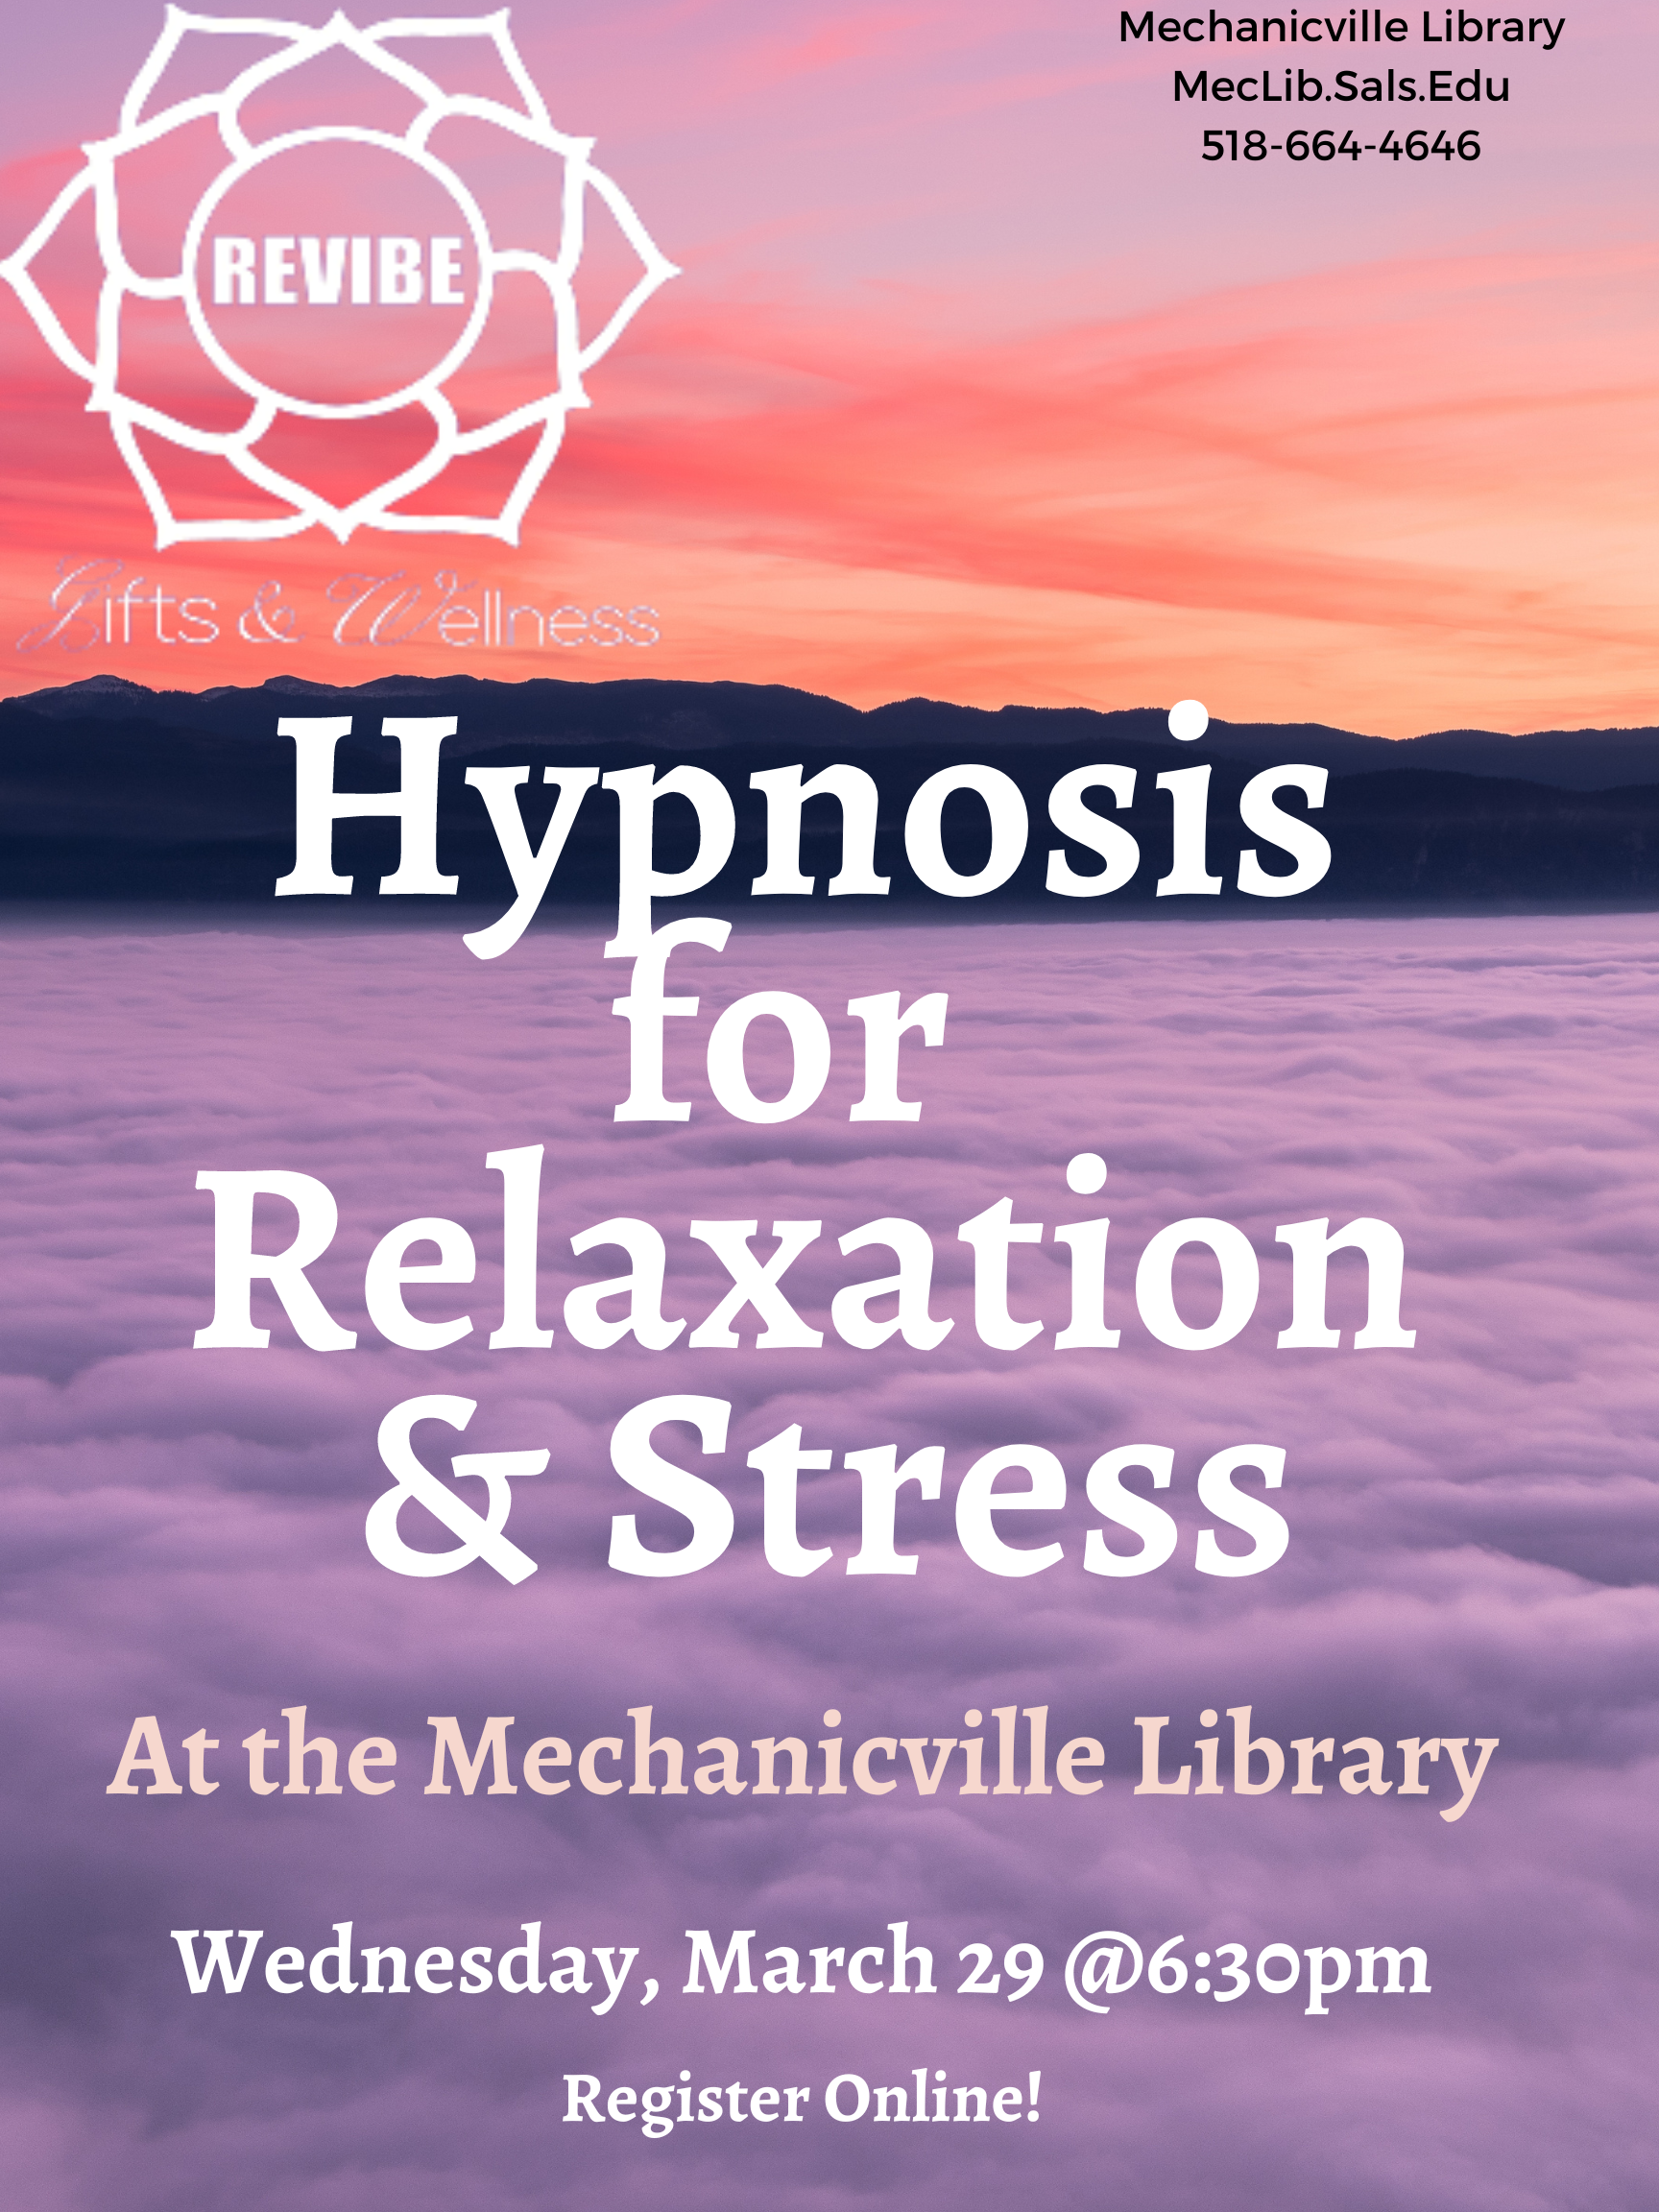 Hypnosis for Relaxation & Stress - Presented by Revibe Wellness of Schuylerville, NY. @ Mechanicville District Public Library | Mechanicville | New York | United States